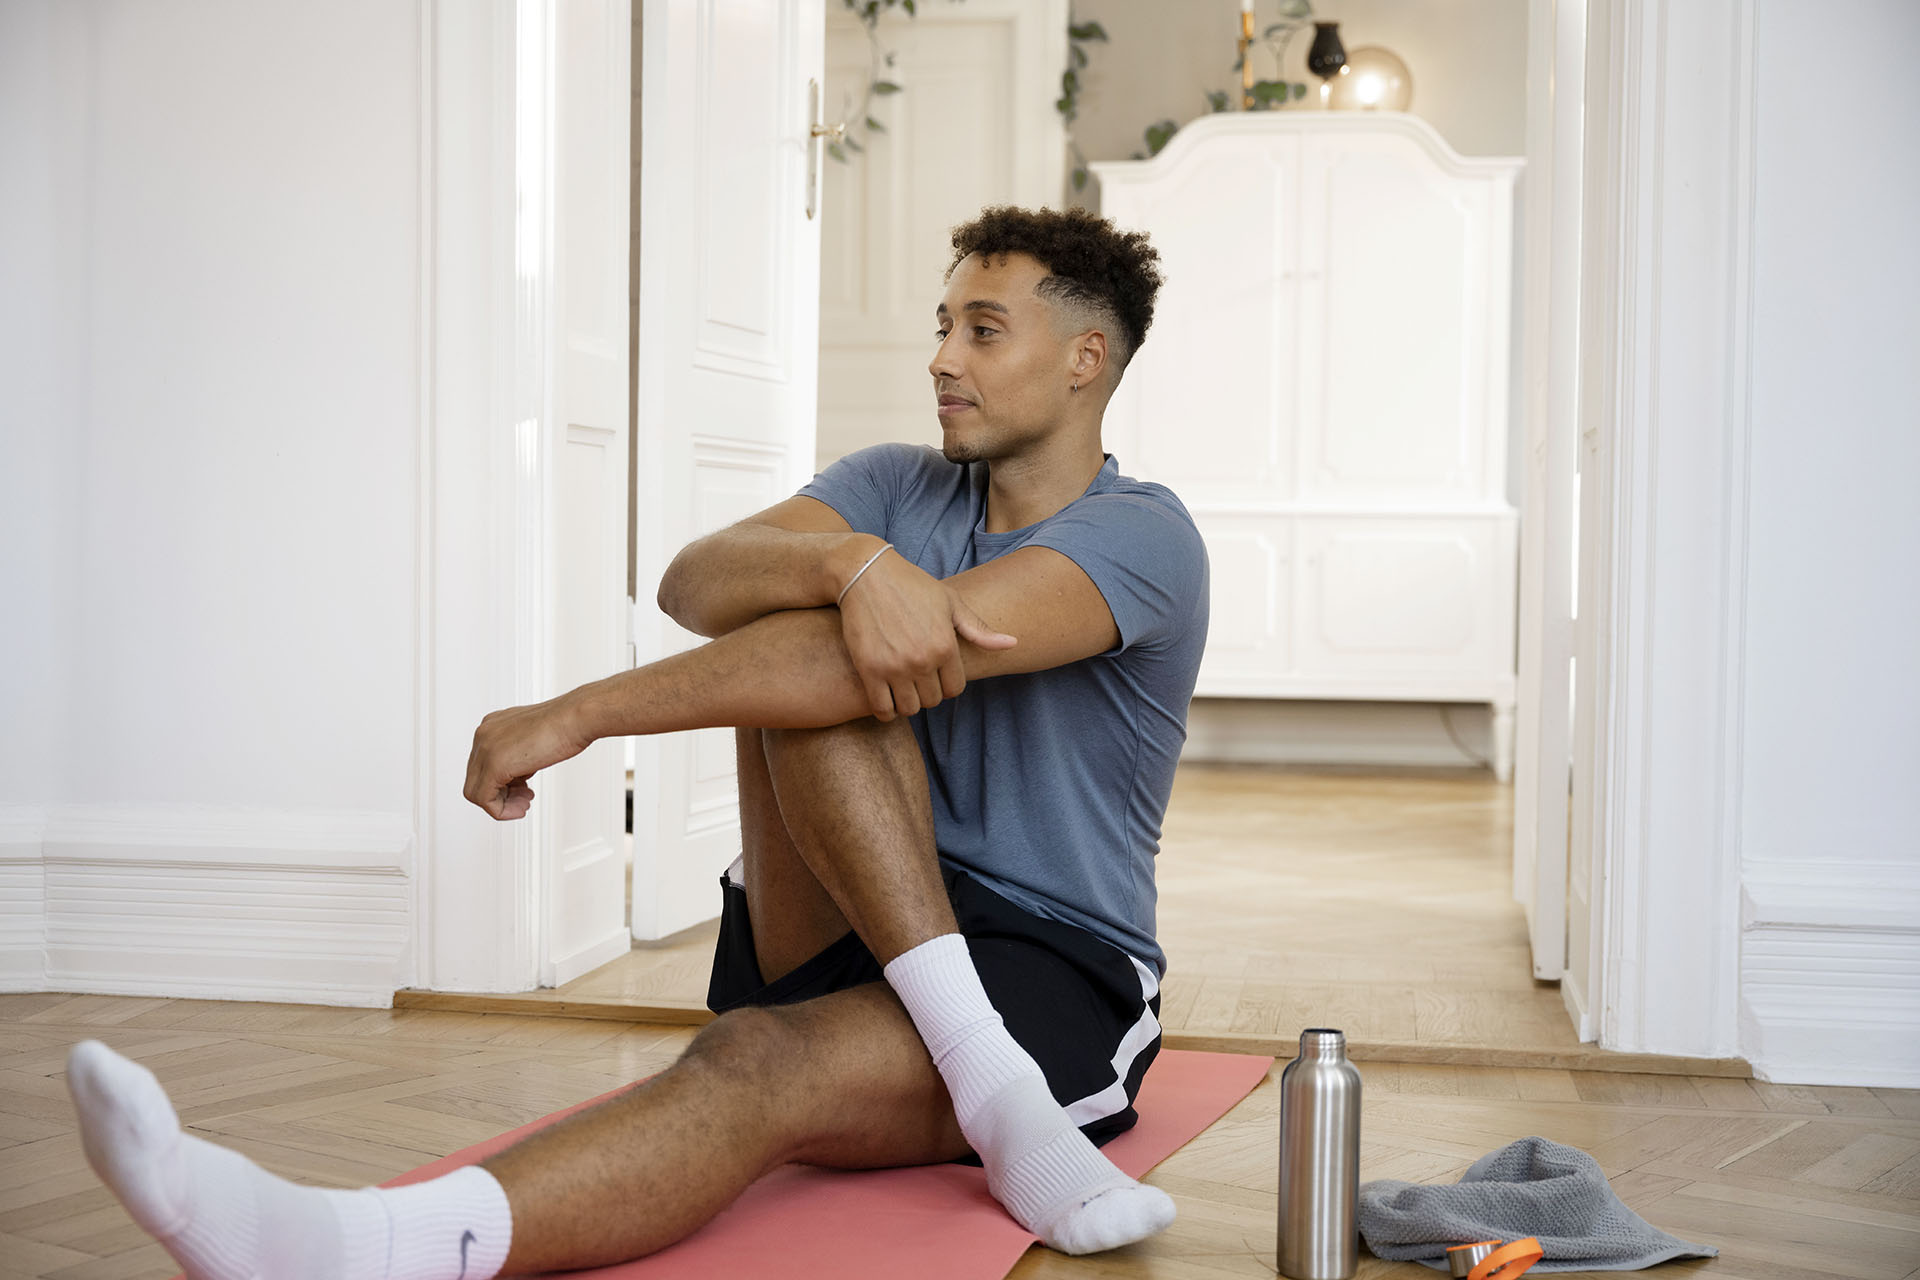 A man with short dark hair and a grey shirt and black shorts is sitting on the floor on a yoga mat. Next to the carpet is a bottle of water and a towel.